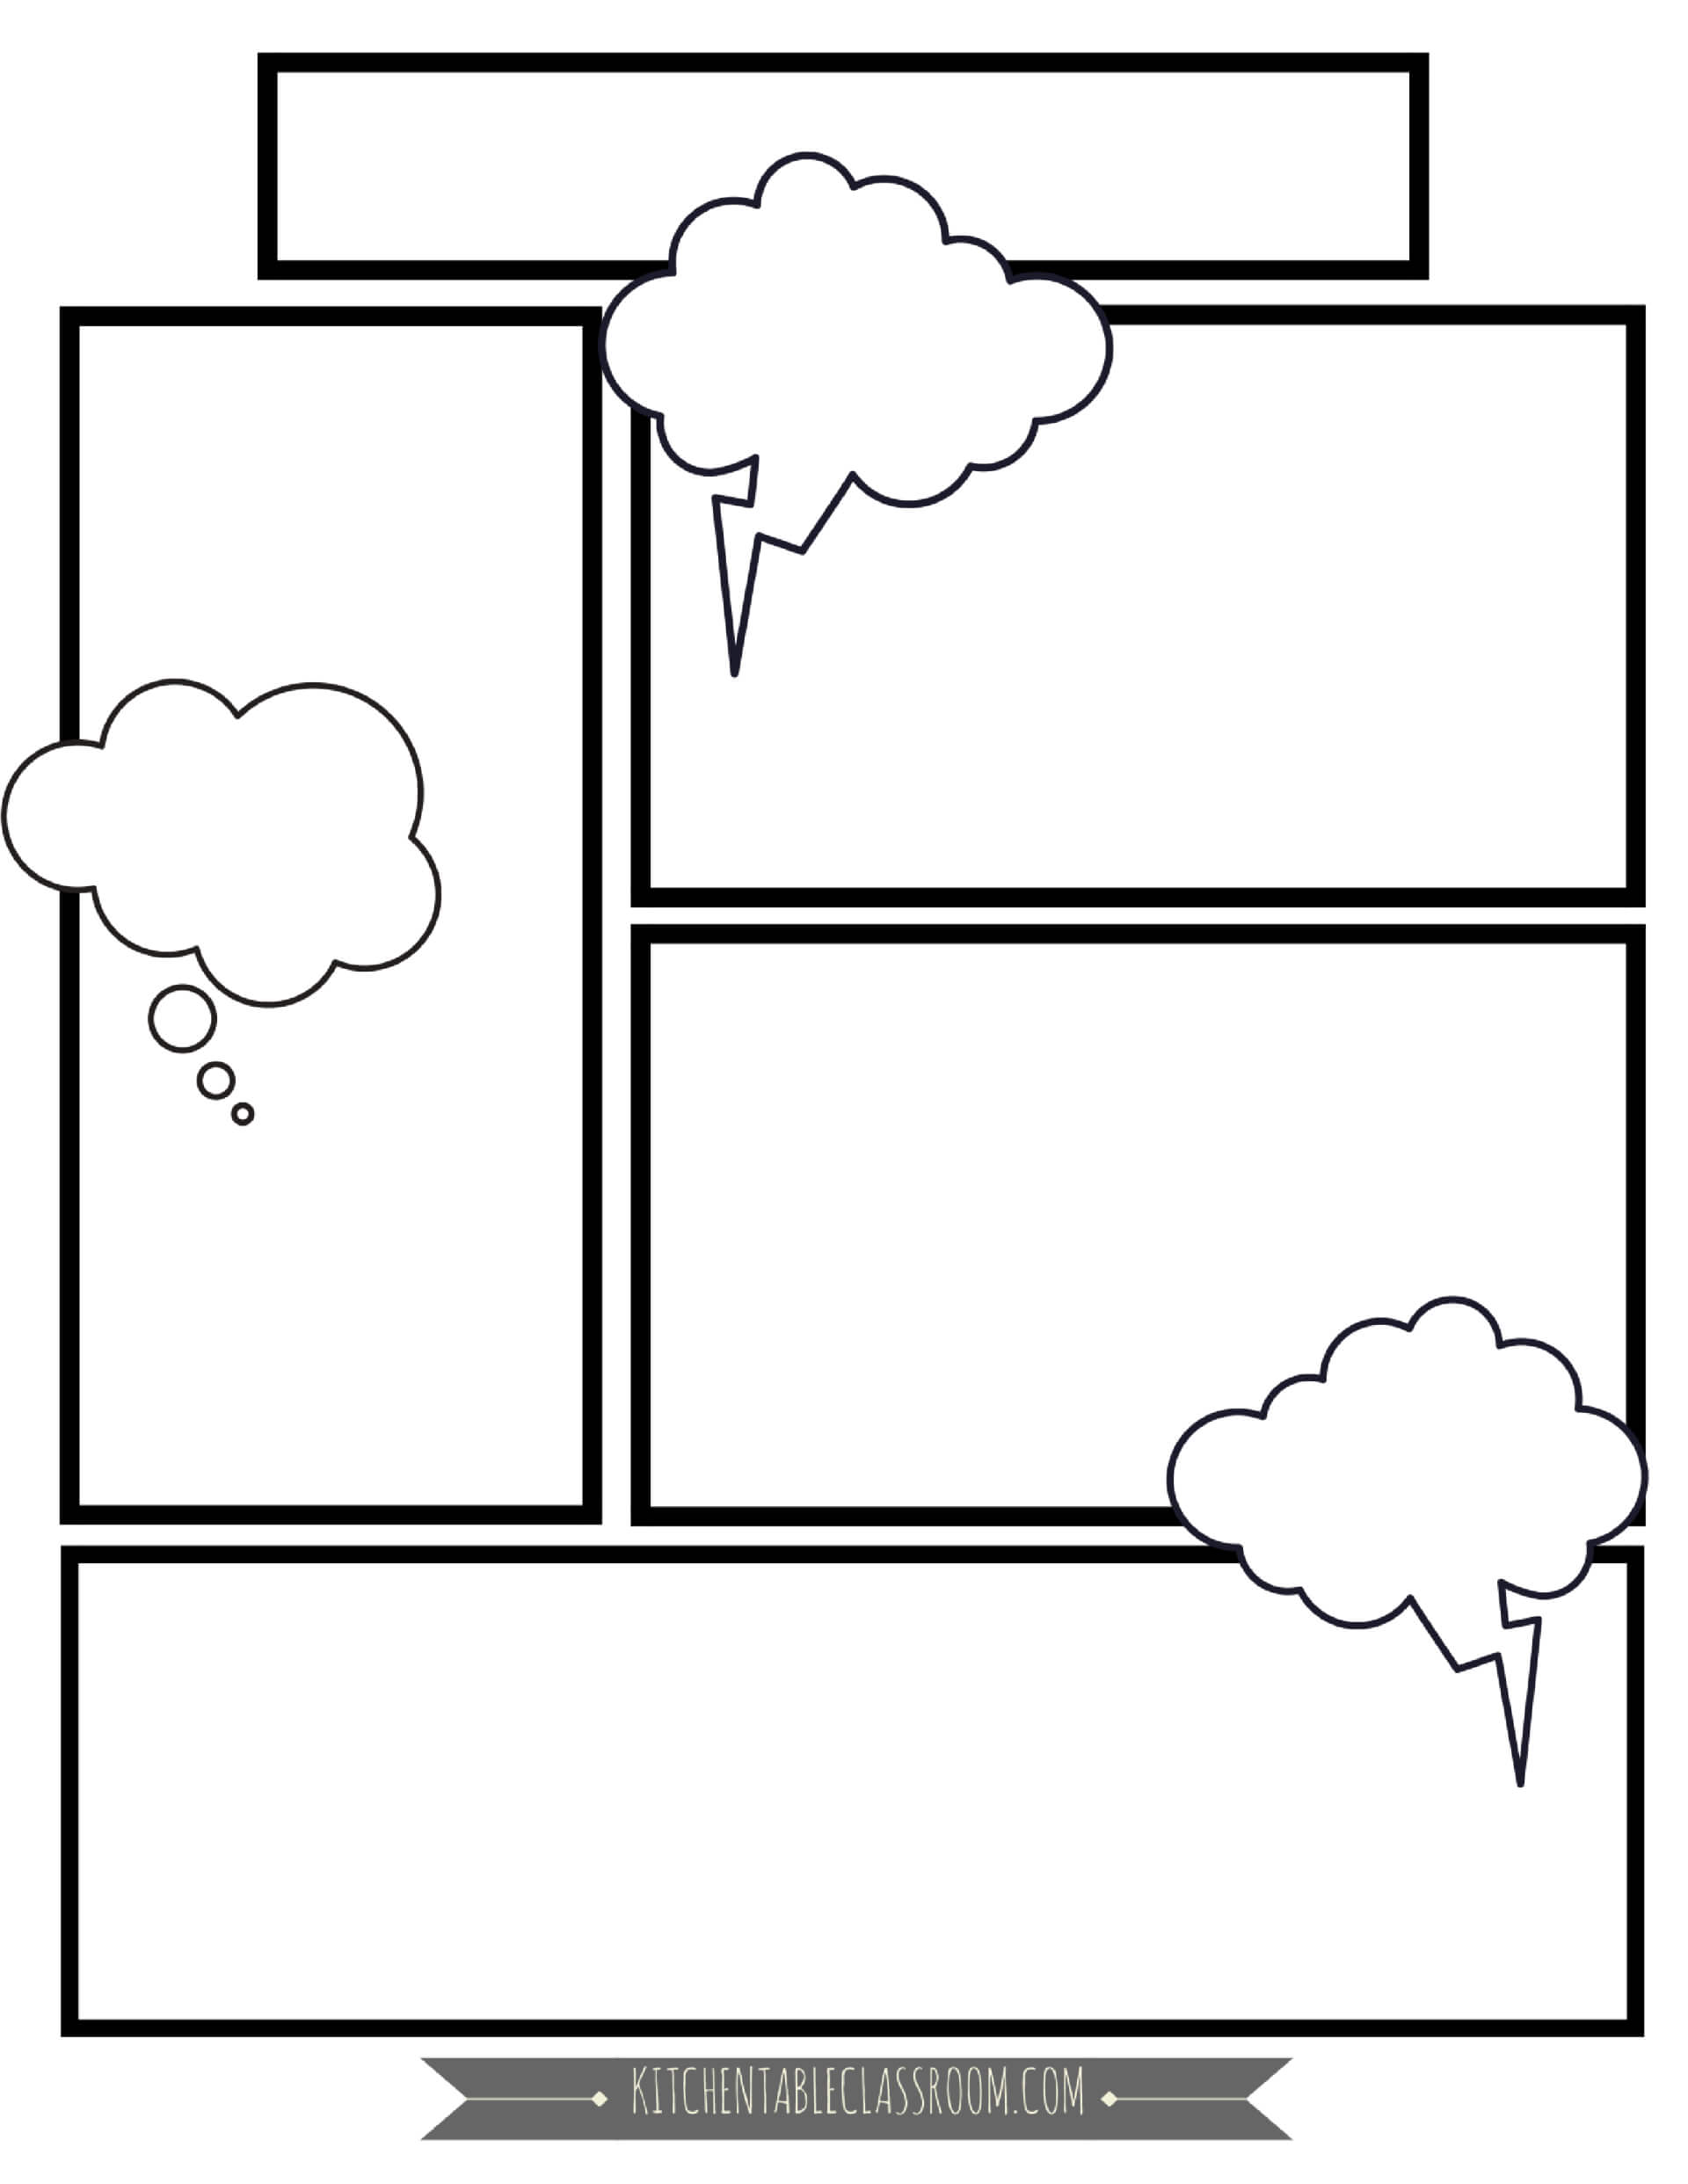 Comic Book Templates – Free Printable Pages | Comic Book With Regard To Superhero Trading Card Template